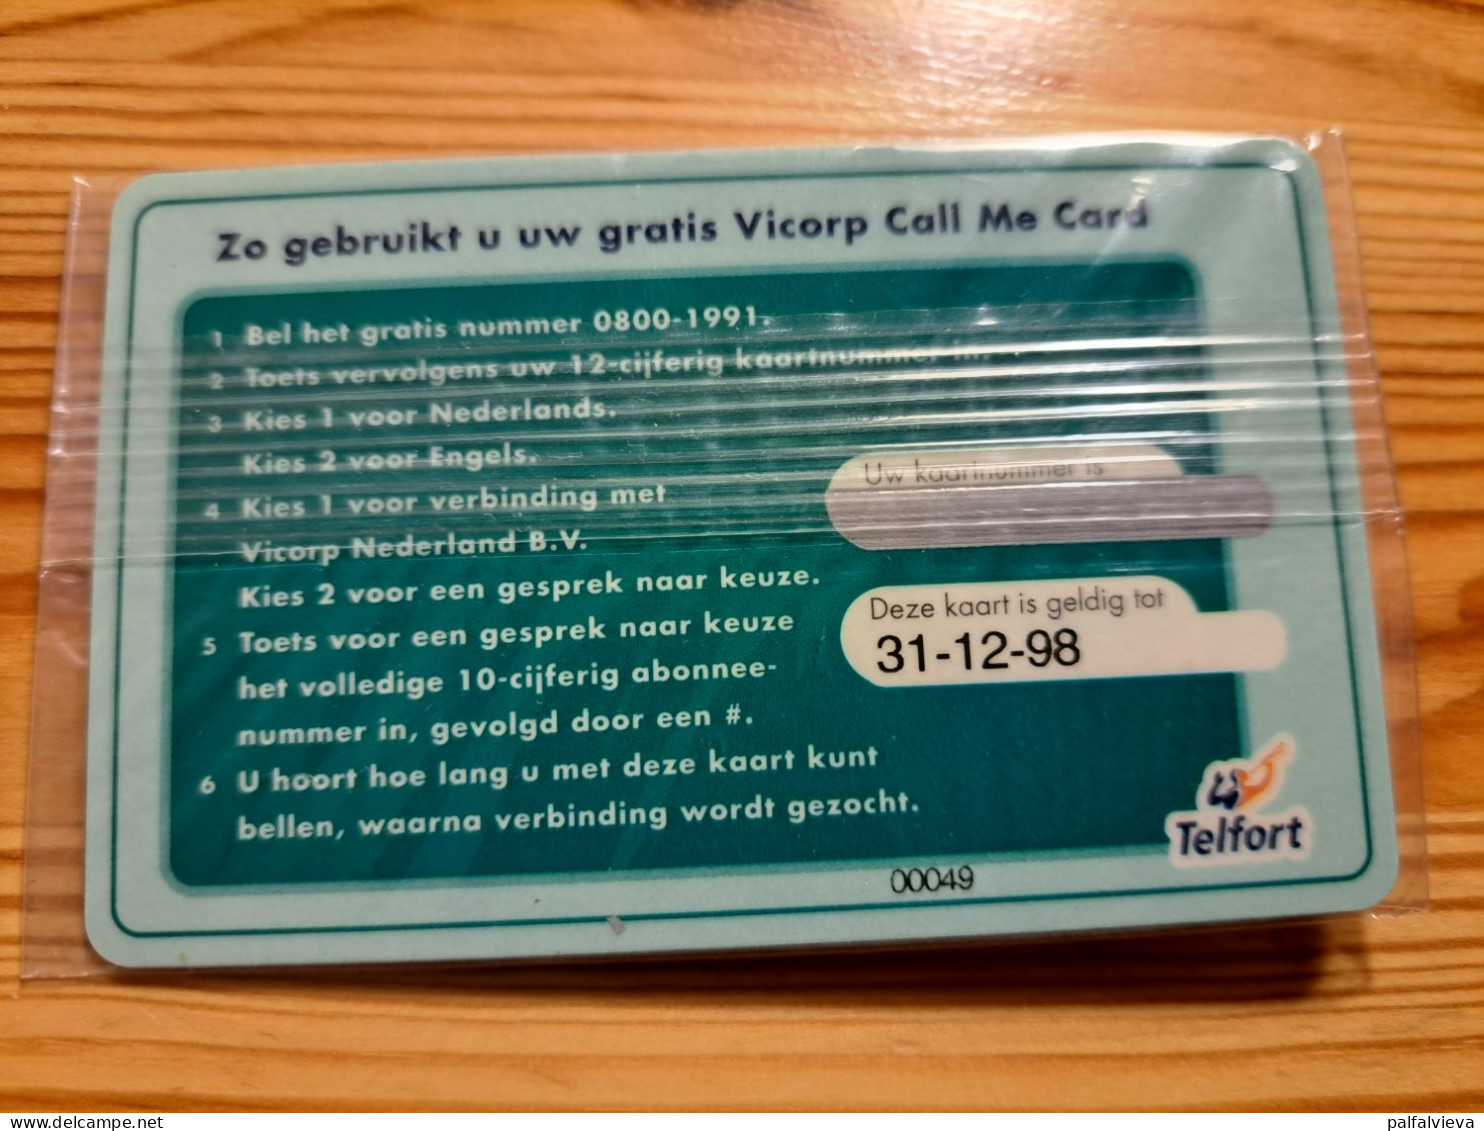 Prepaid Phonecard Netherlands, Telfort - Vicorp - Mint In Blister - Schede GSM, Prepagate E Ricariche